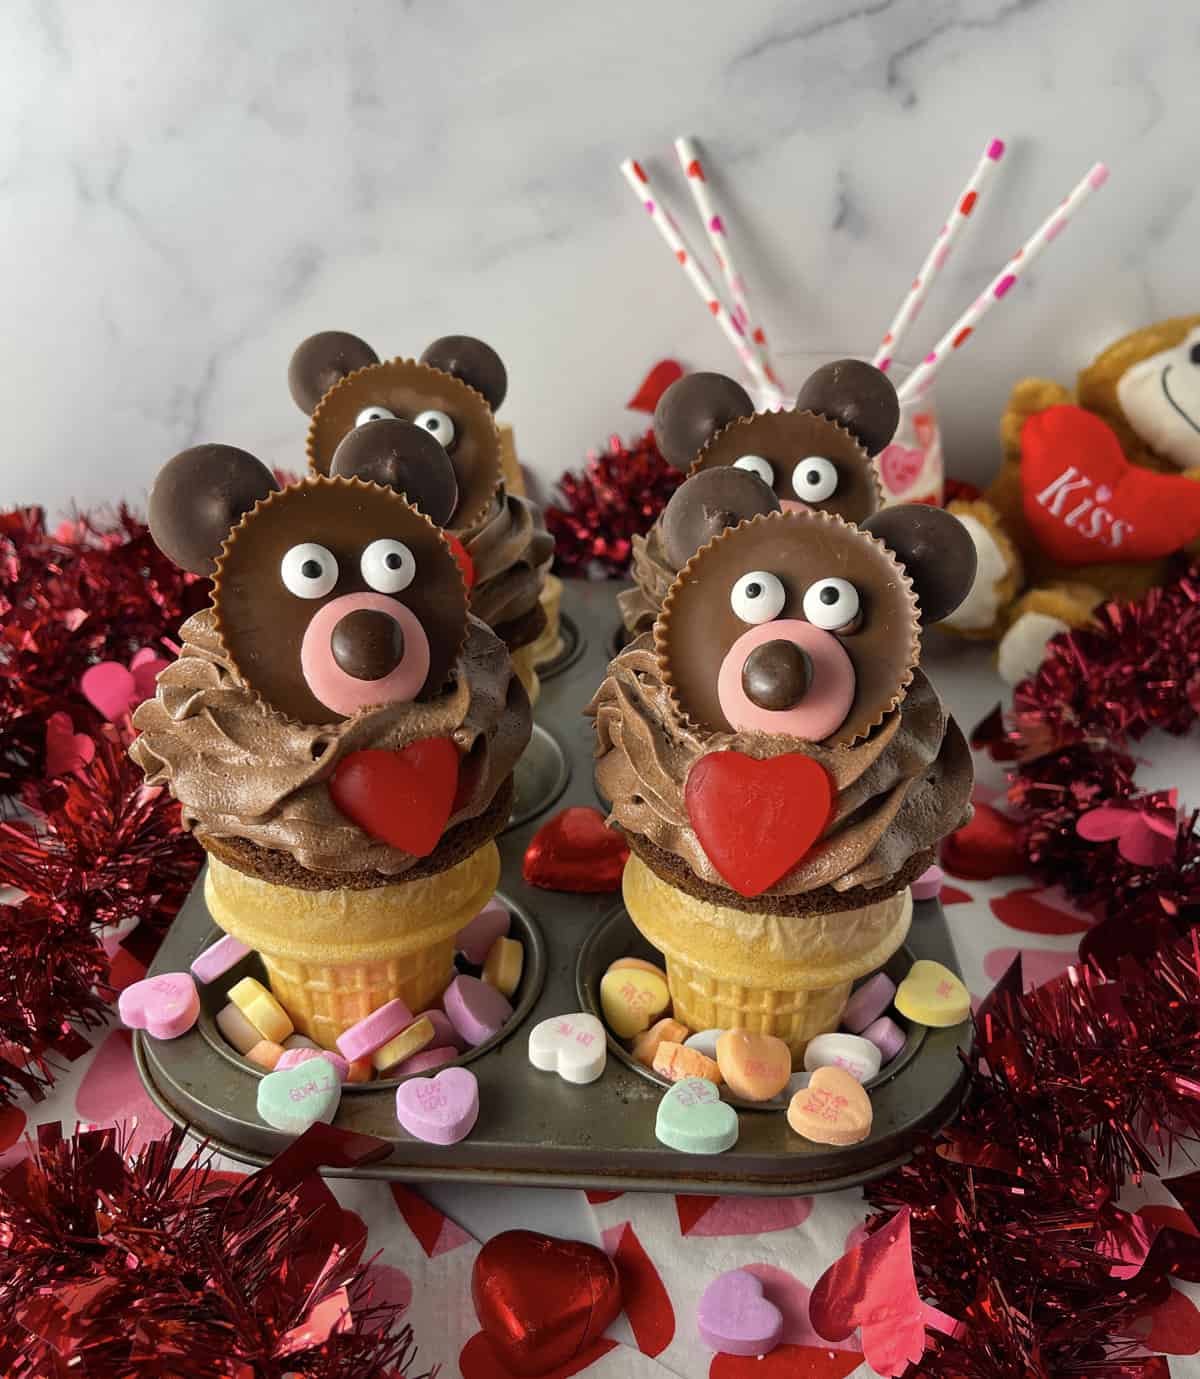 Muffin pan with four decorated teddy bear cupcakes and candy on the sides.